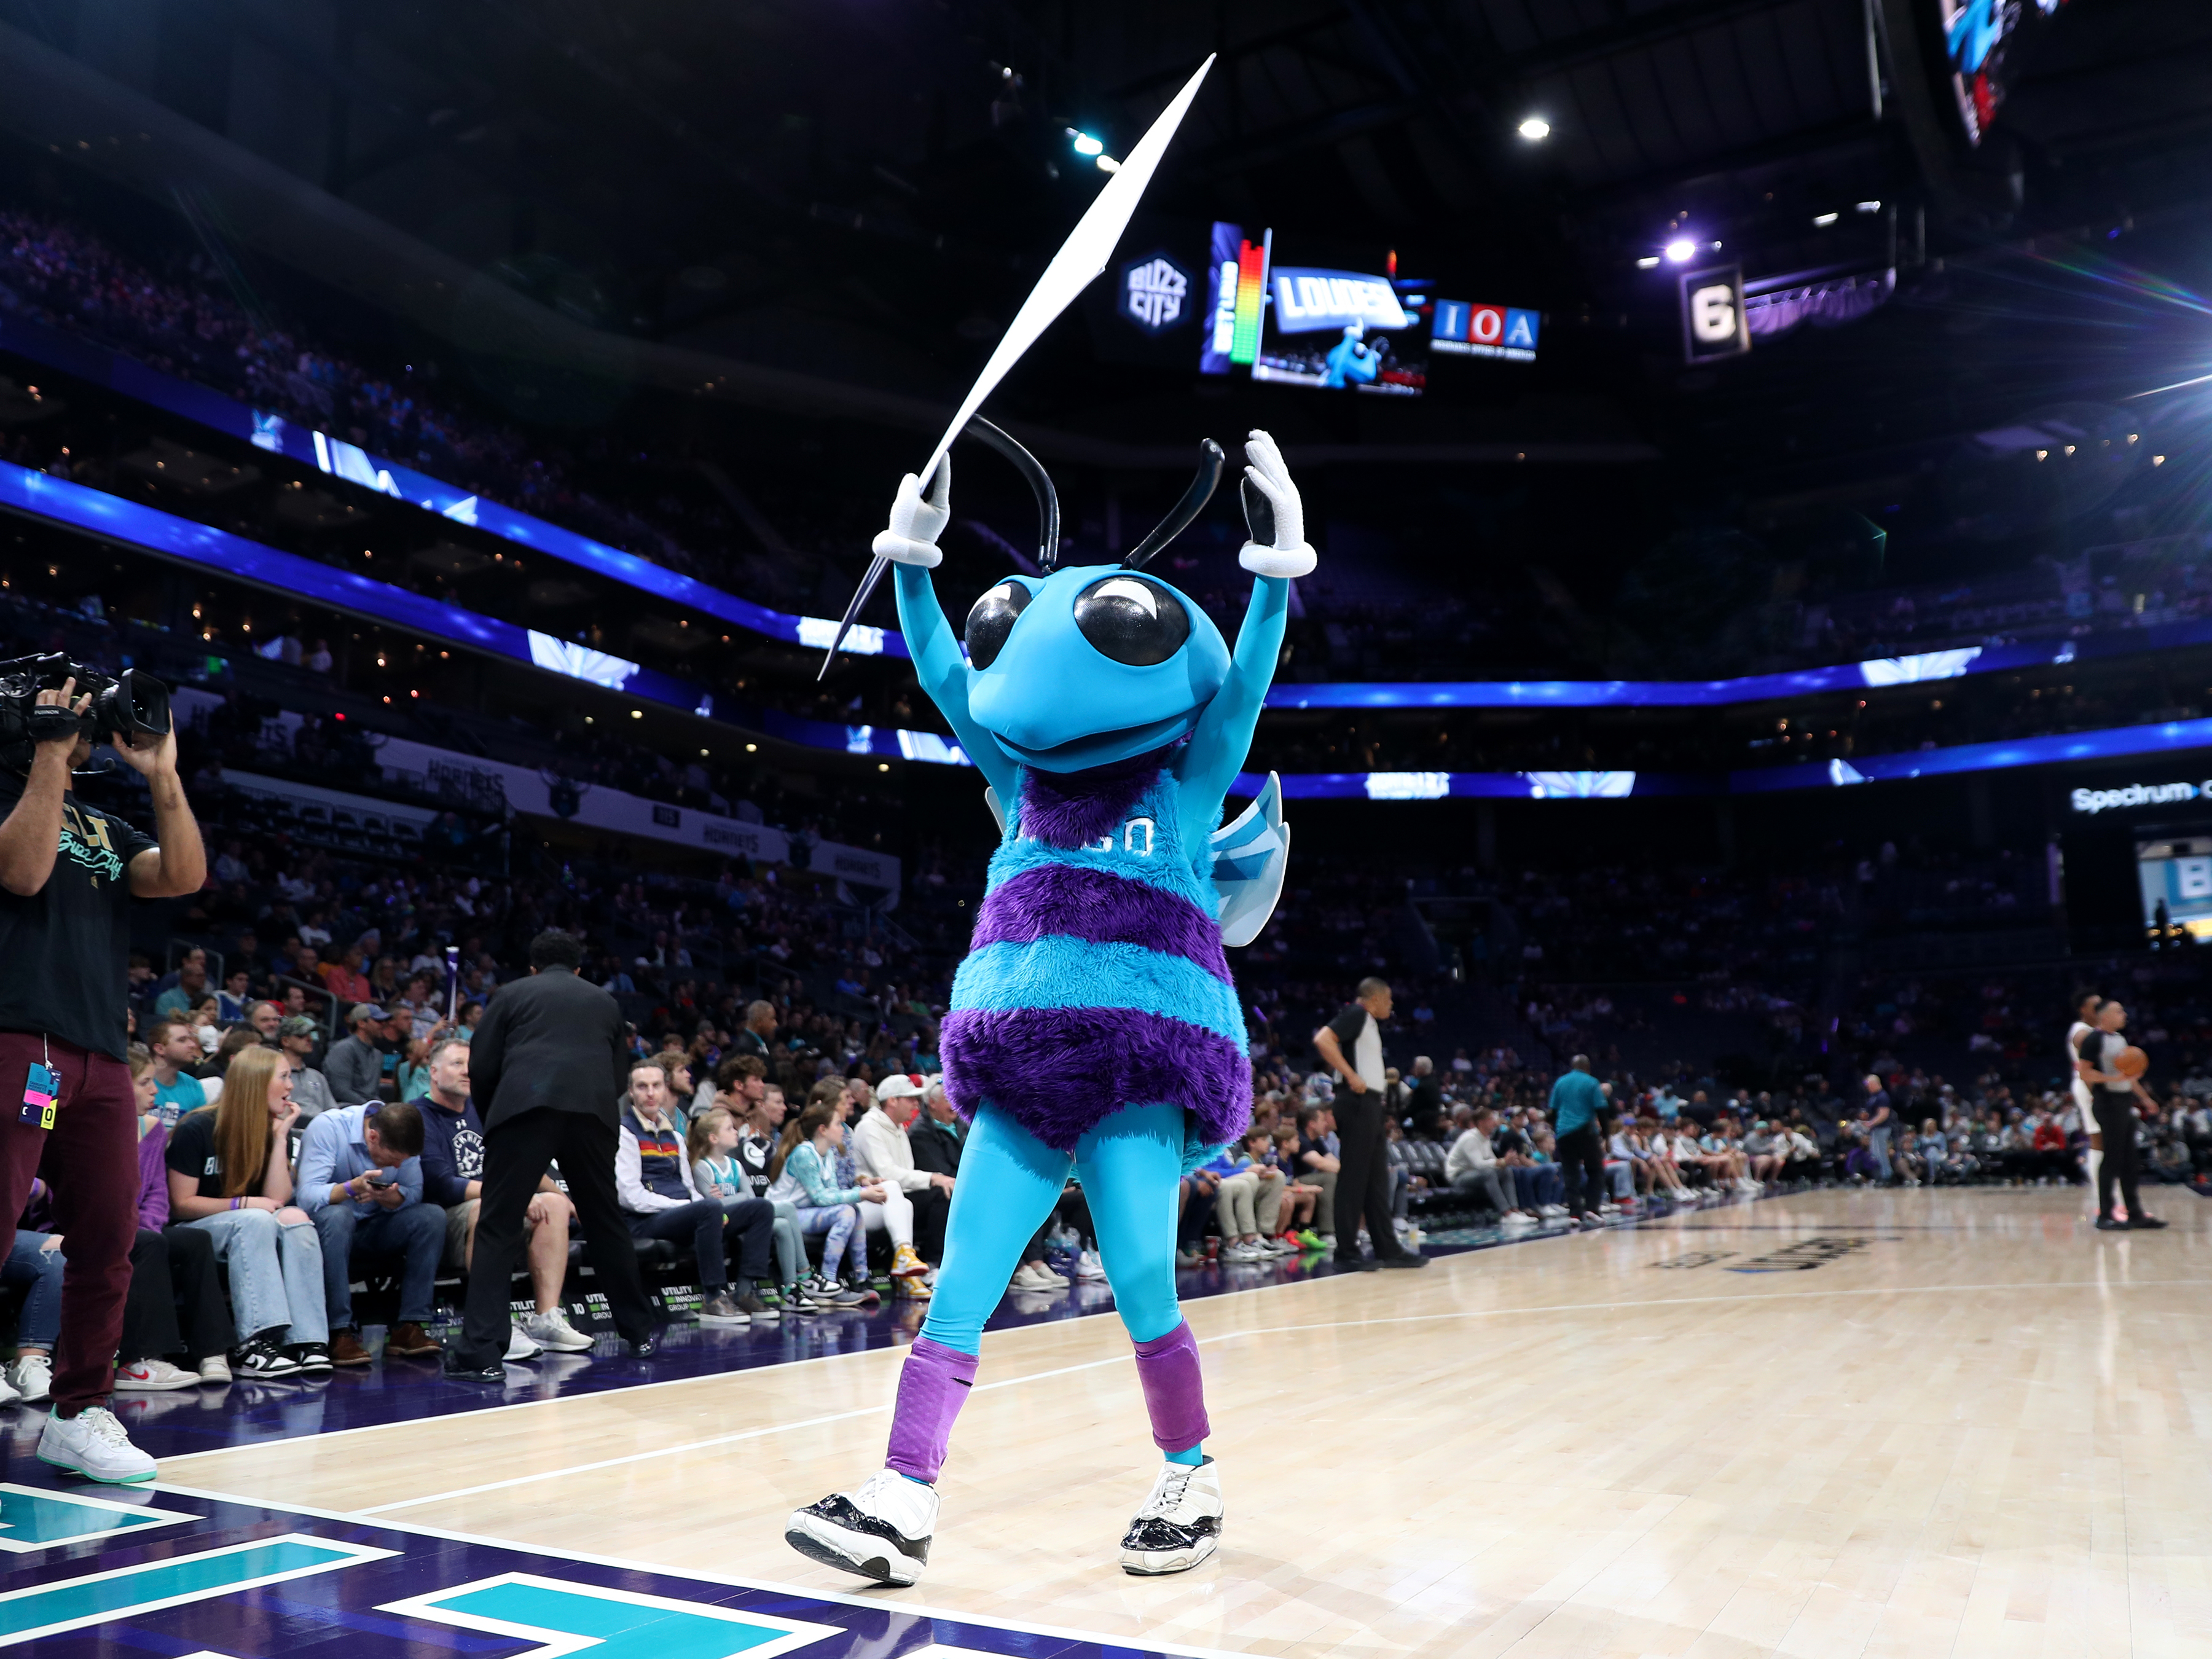 Hugo the mascot of the Charlotte Hornets during the game against the Toronto Raptors on April 2, 2023 at Spectrum Center in Charlotte, North Carolina.